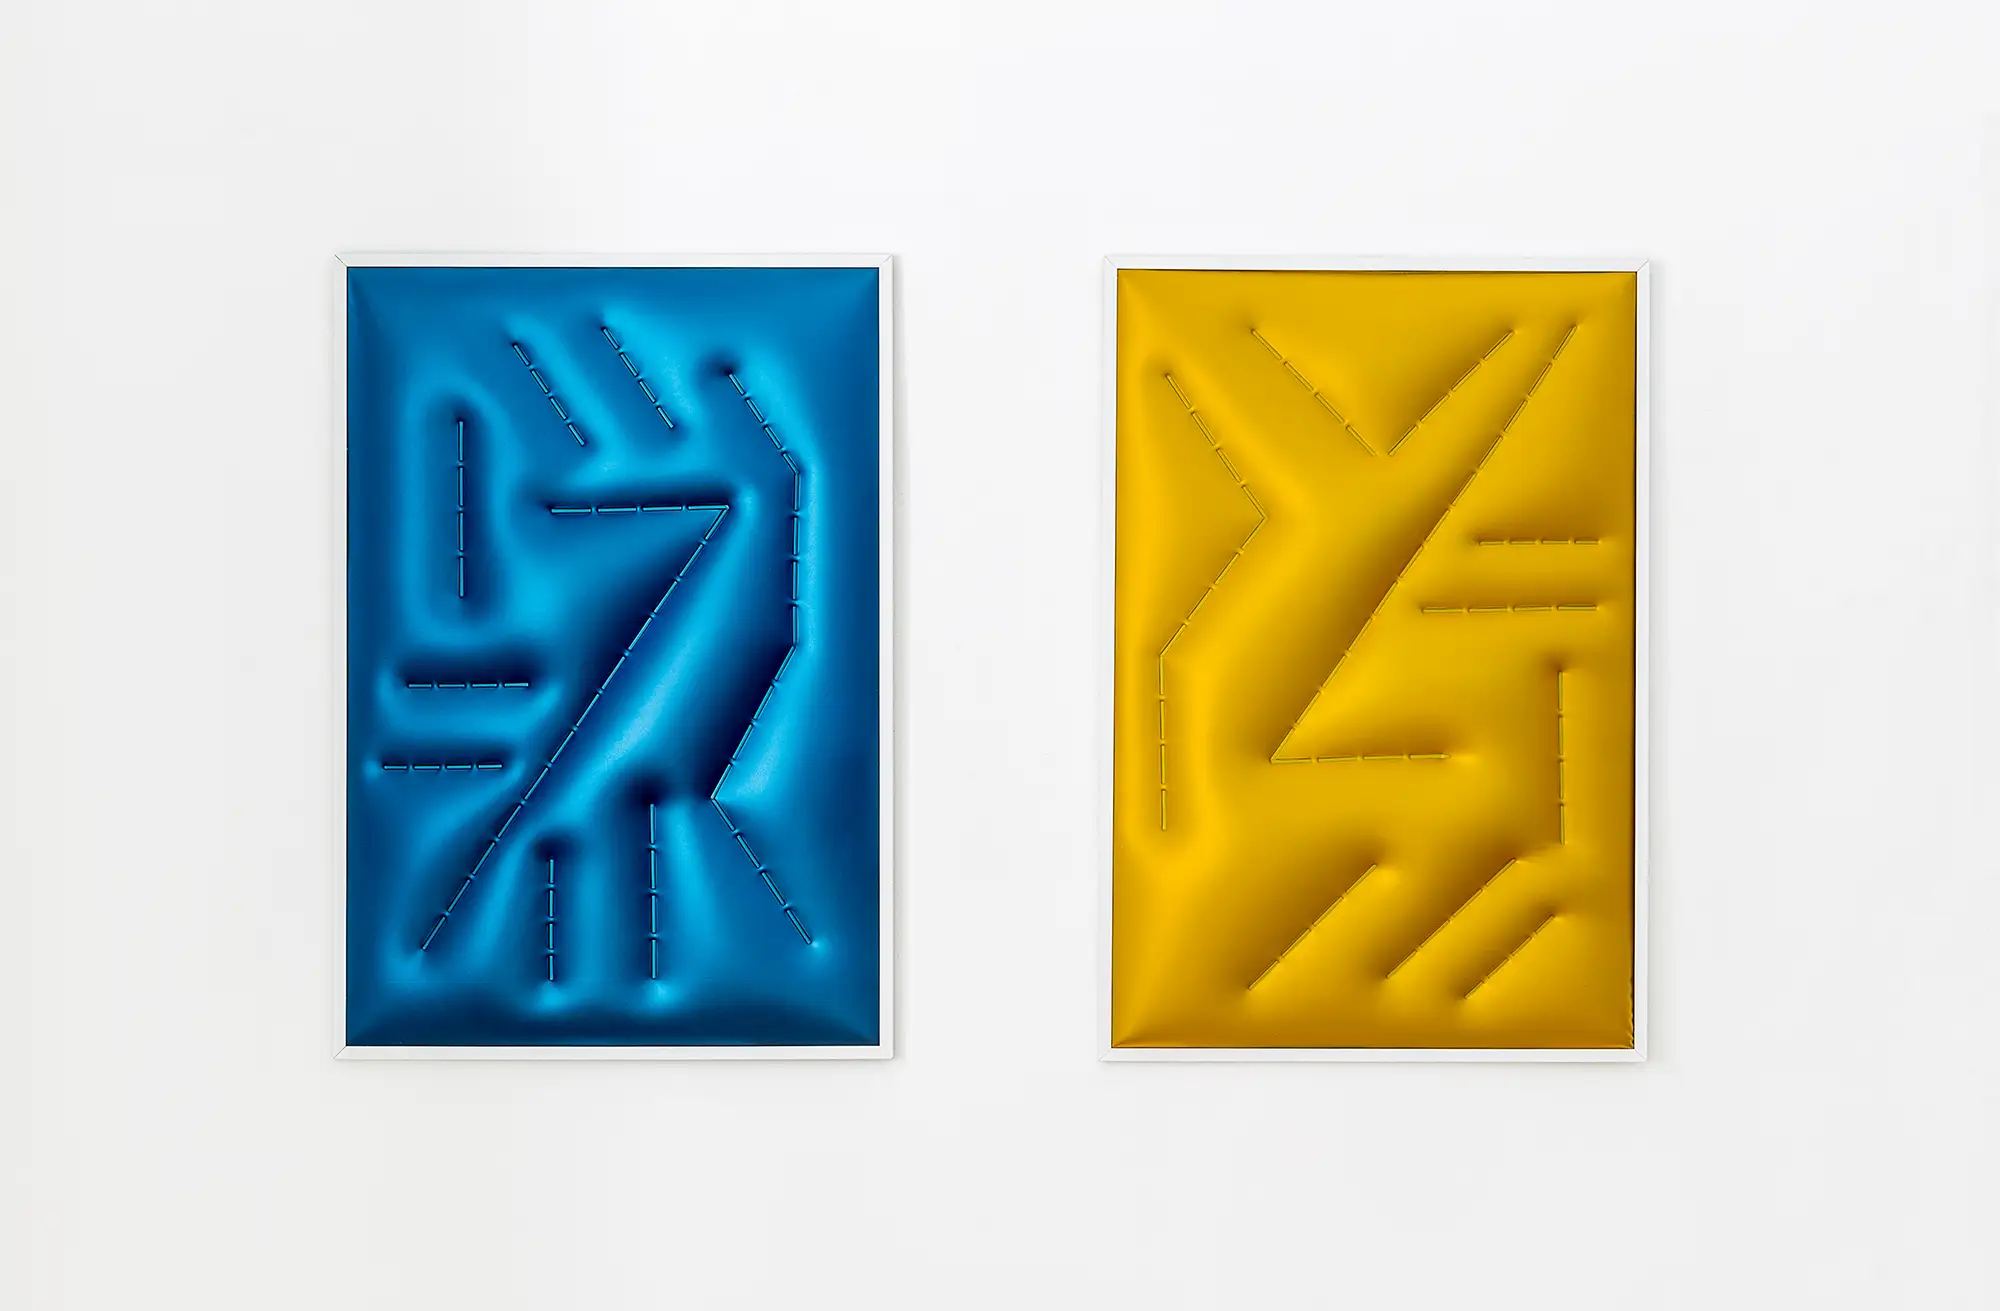 johannes steininger, blue and yellow, wallpiece, inflatable, minimalistic, contemporary art